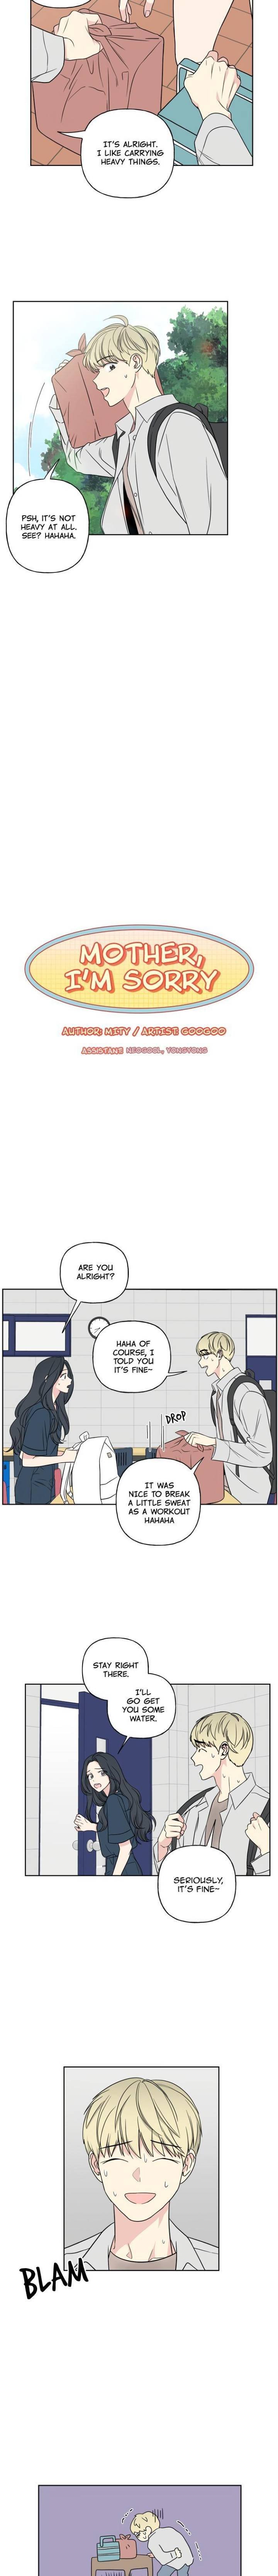 mother-im-sorry-chap-21-1